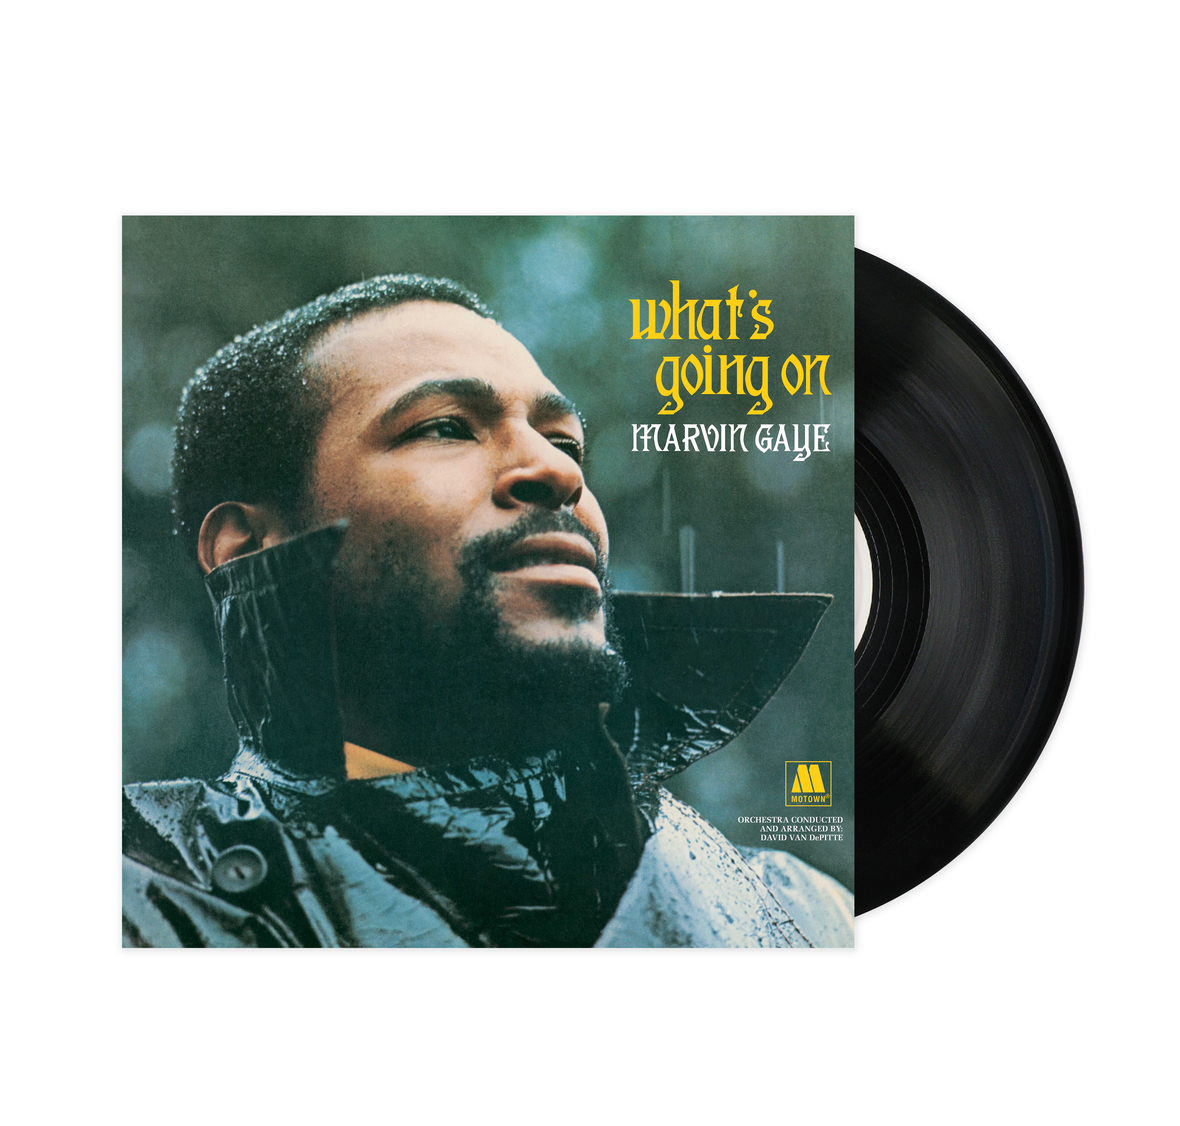 New Music: Marvin Gaye - What's Going On (Duet with BJ the Chicago Kid)